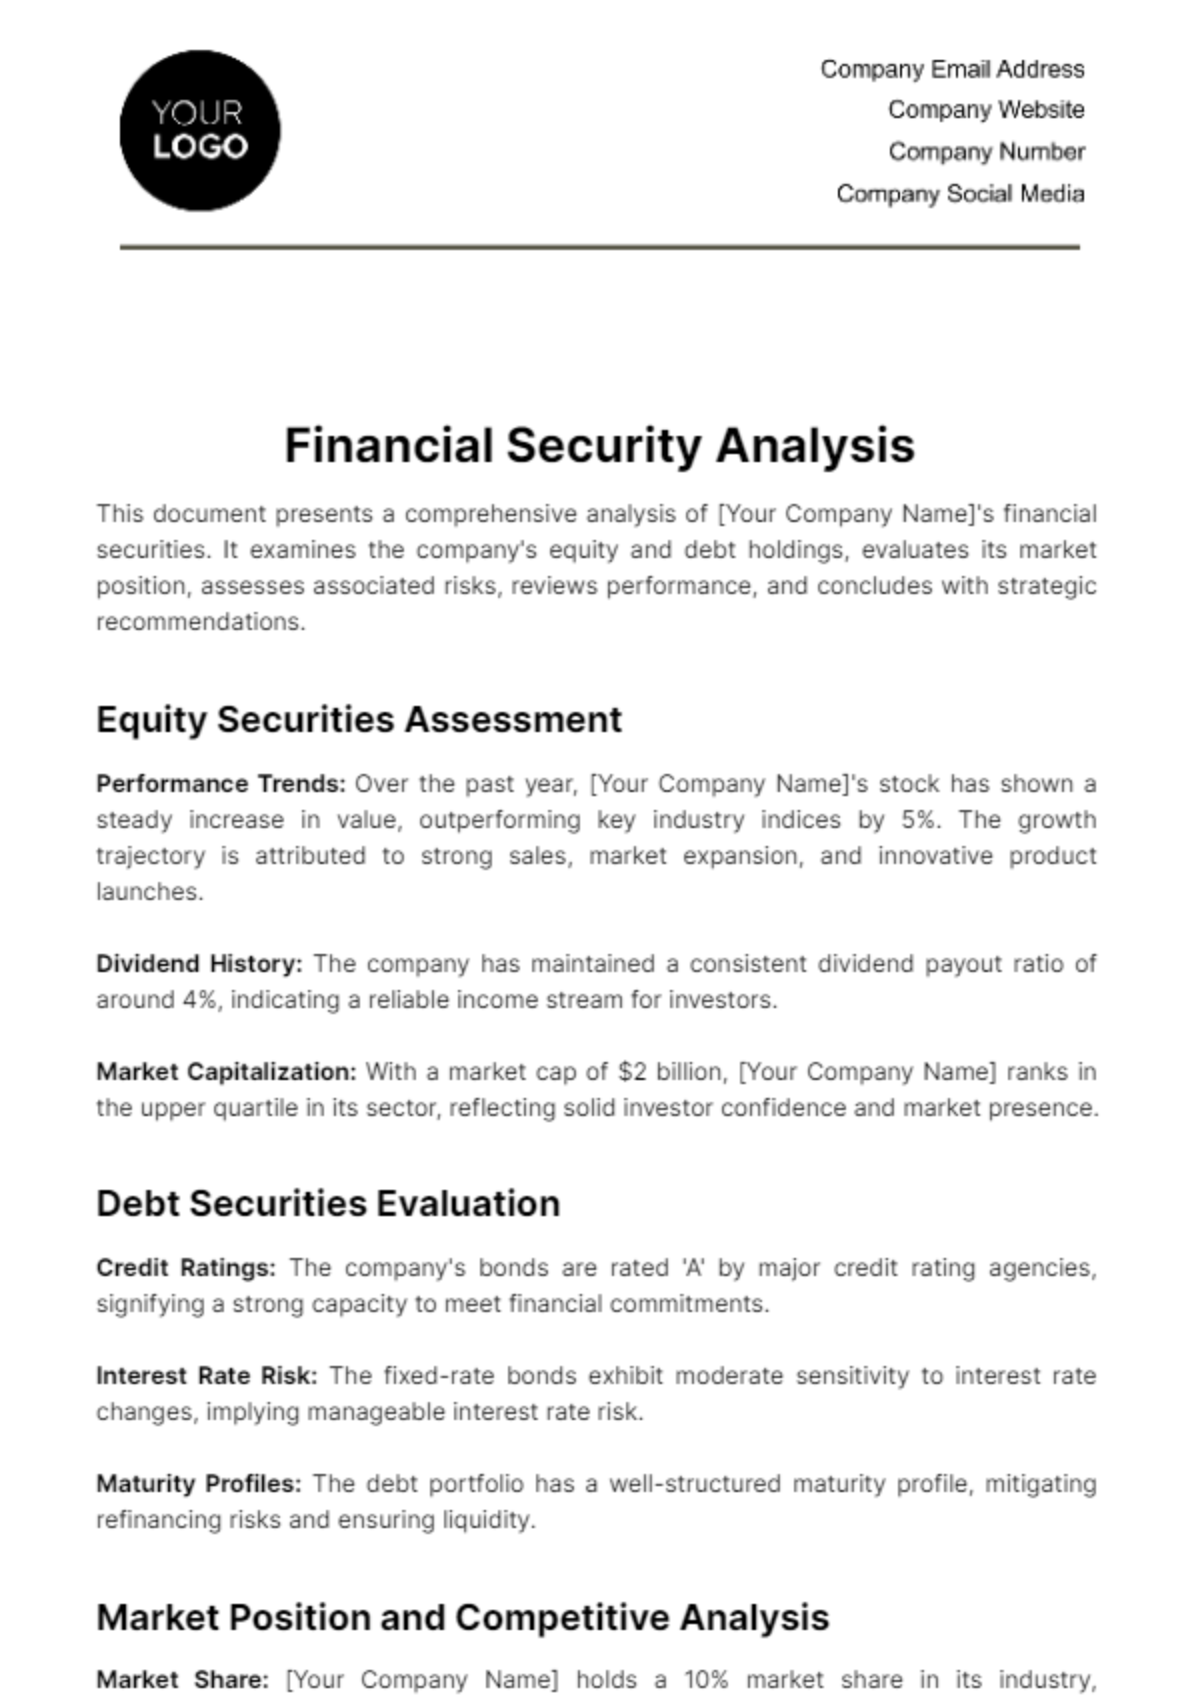 Financial Security Analysis Template